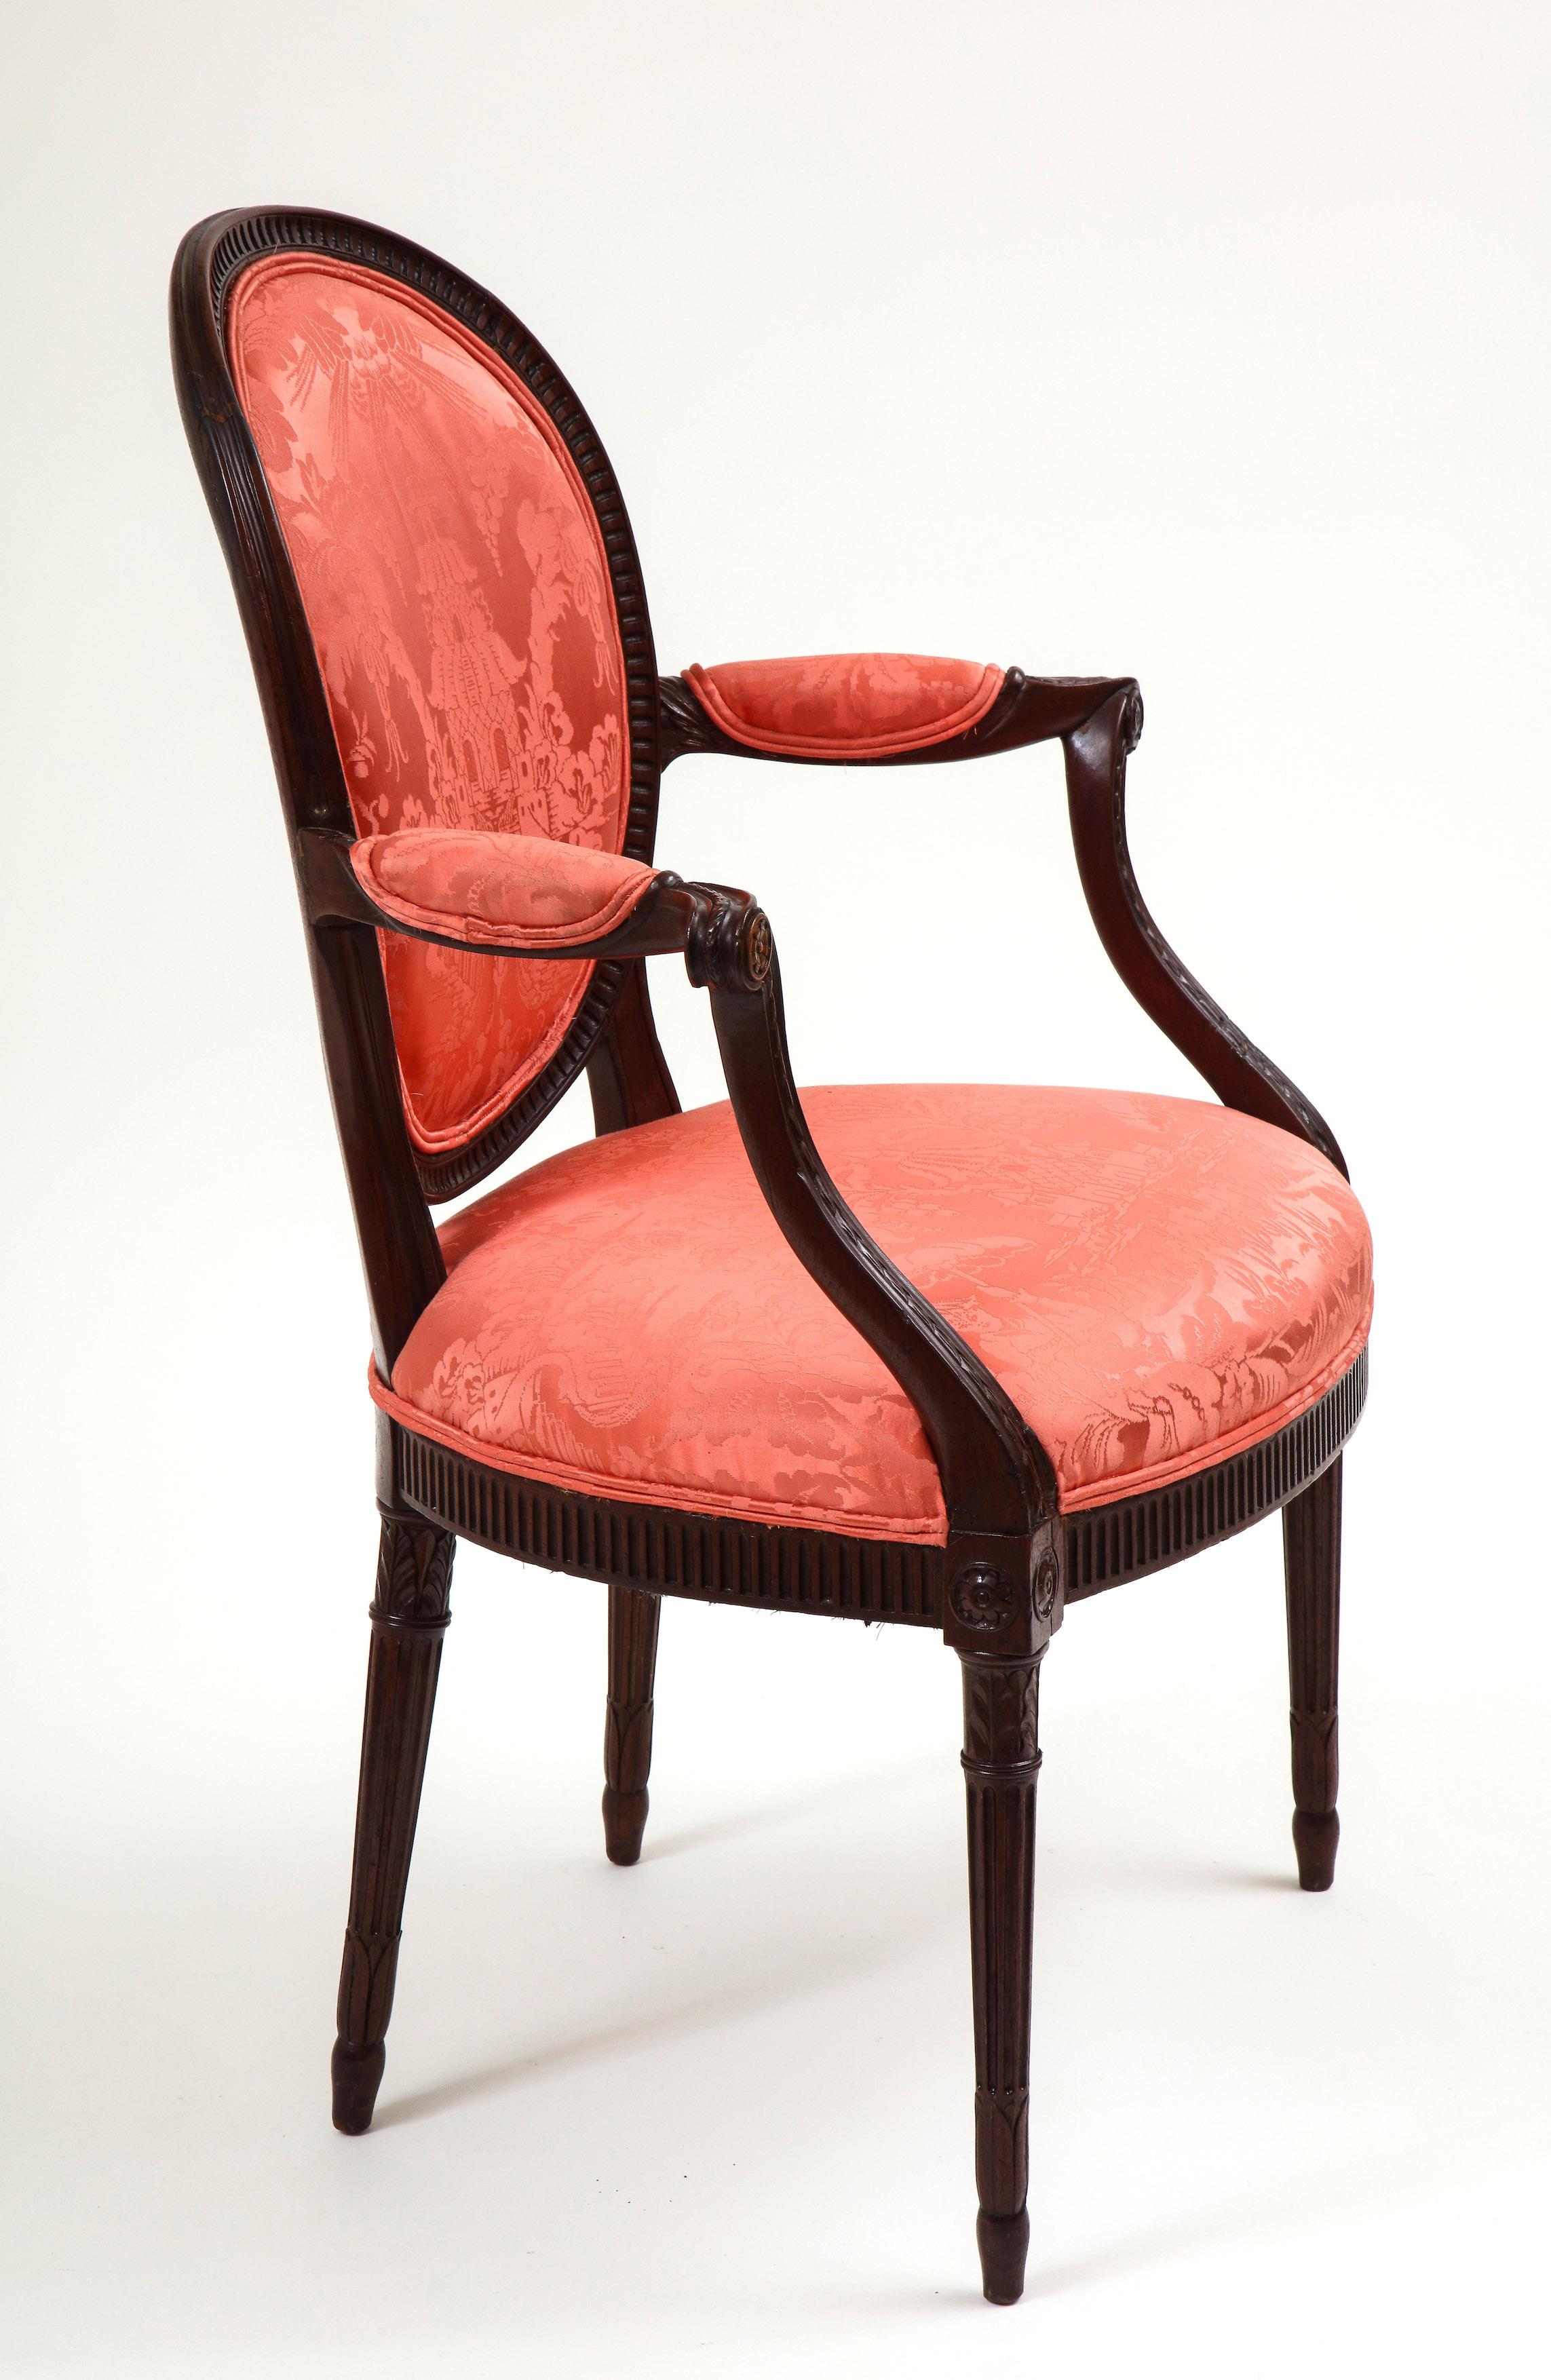 Upholstered in a chinoiserie red silk damask; the oval back finely carved with stop-fluting and issuing outswept padded armrests finely carved bellflower garlands; raised on tapering stop-fluted legs with foliate-wrapped capitals and feet and headed